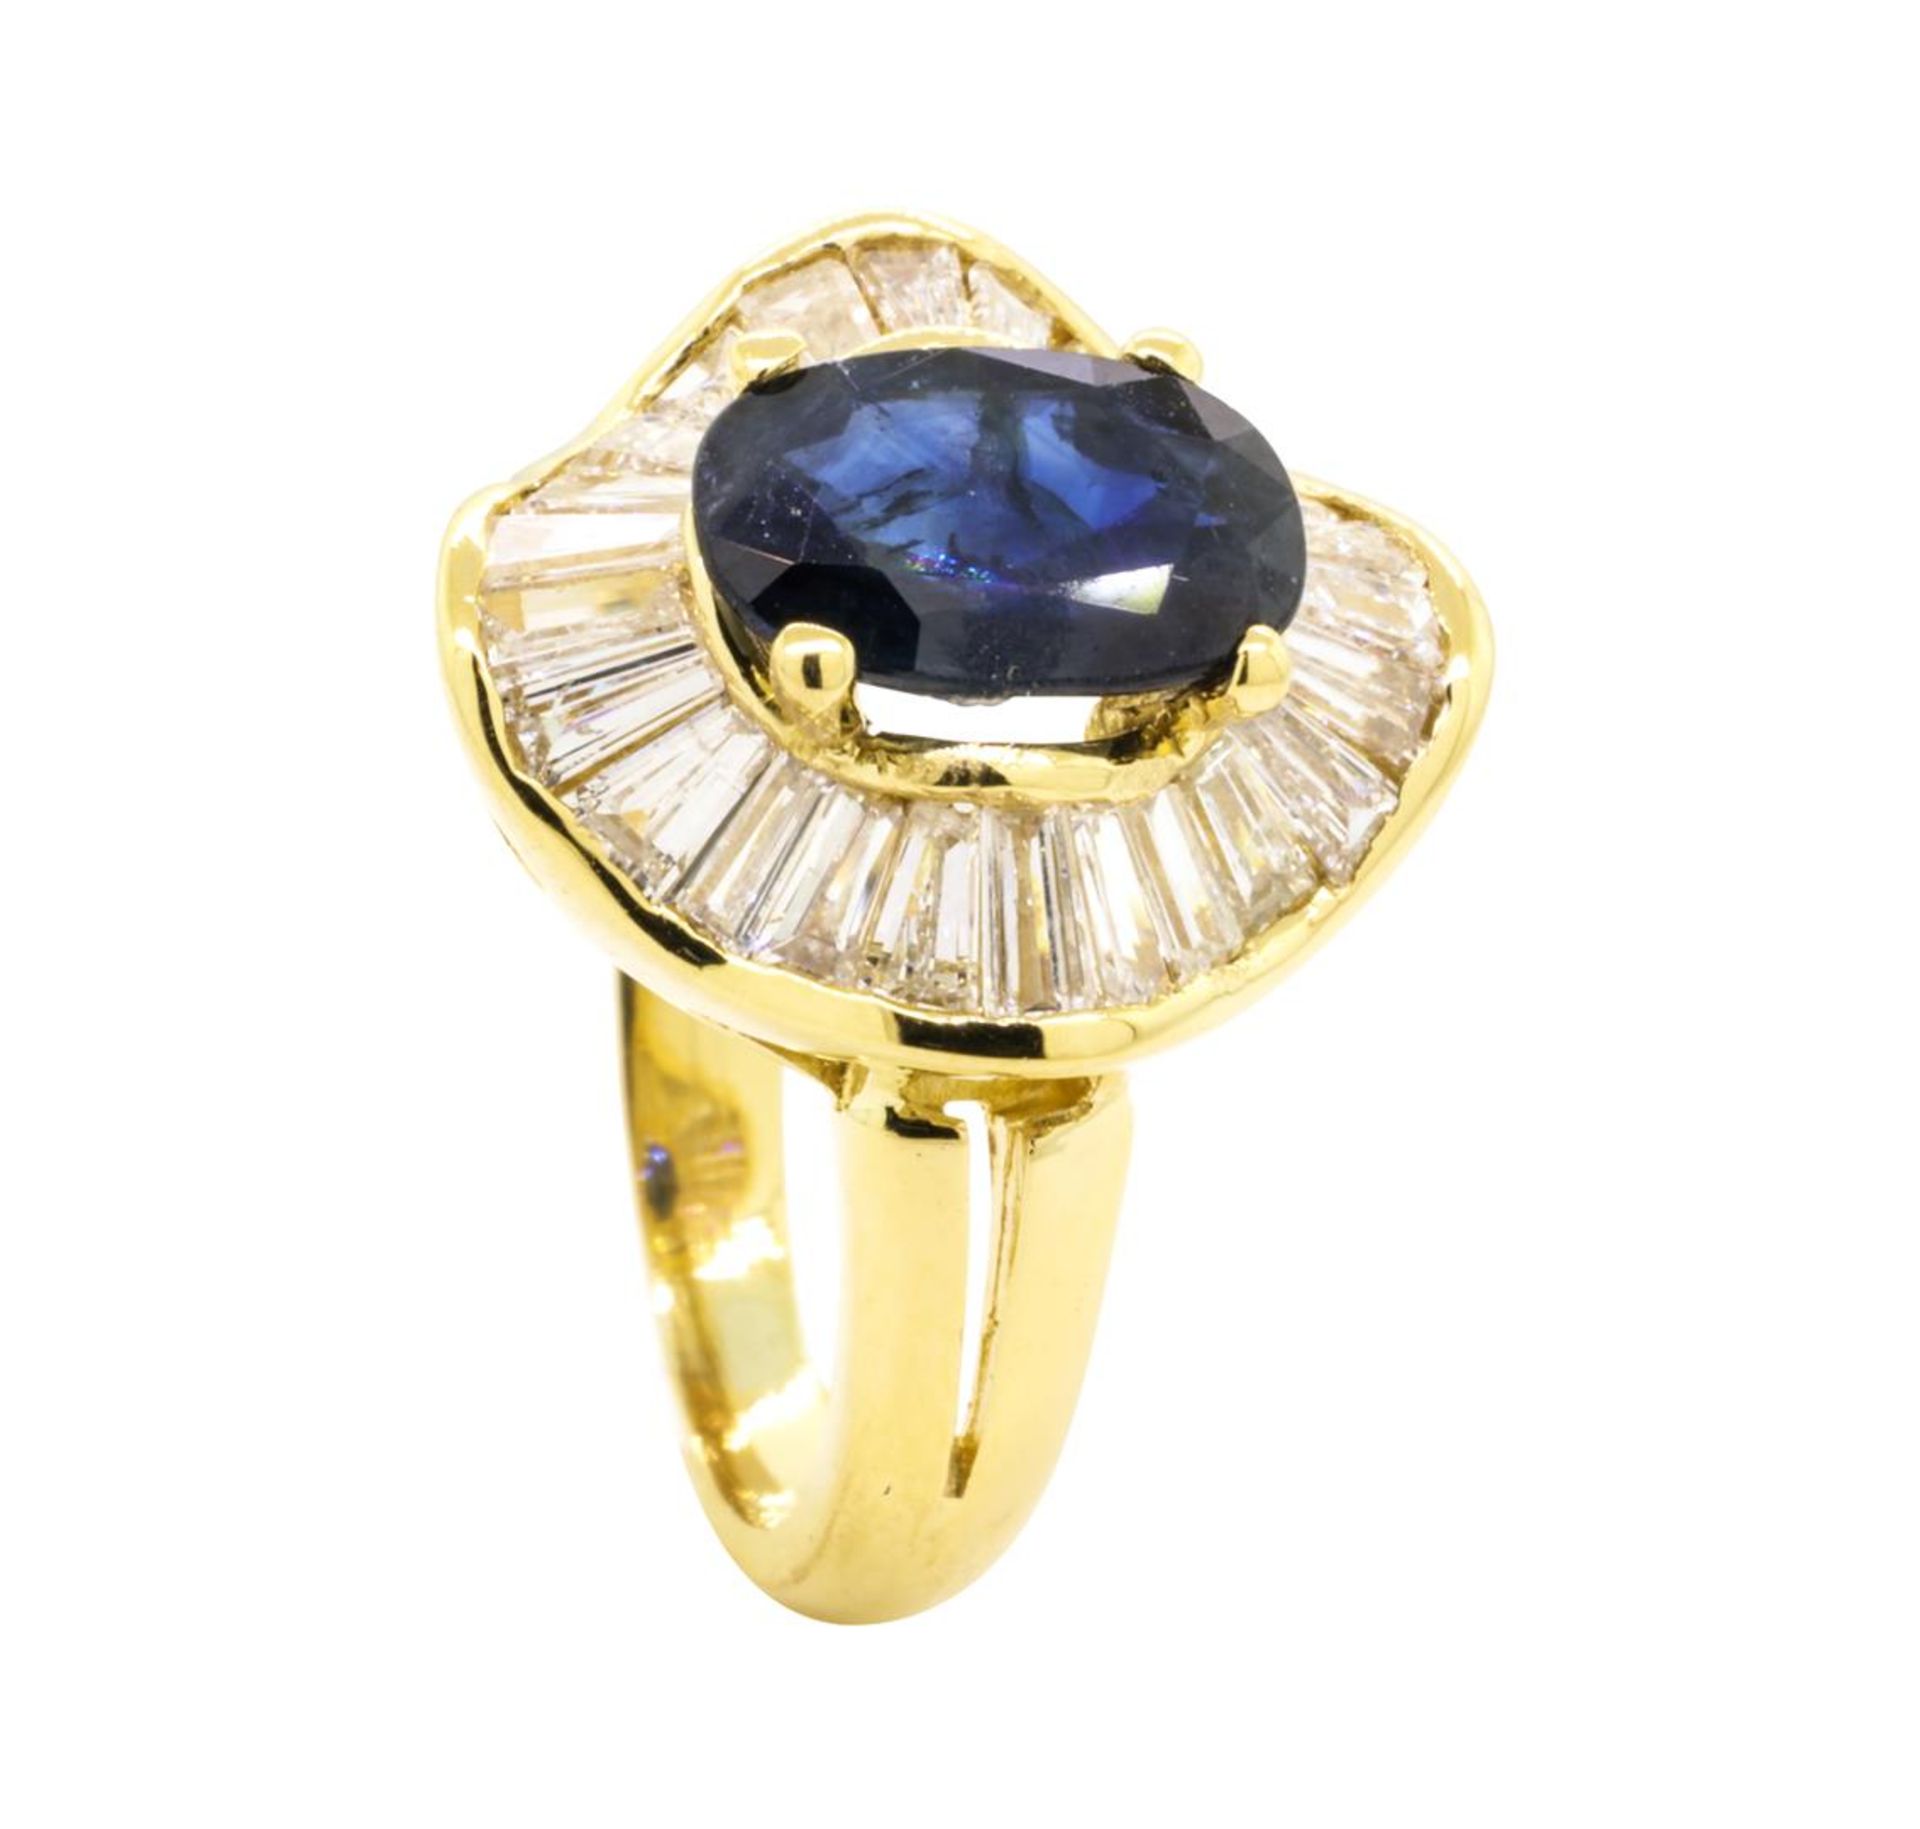 2.90 ctw Sapphire and Diamond Ring - 18KT Yellow Gold - Image 4 of 5